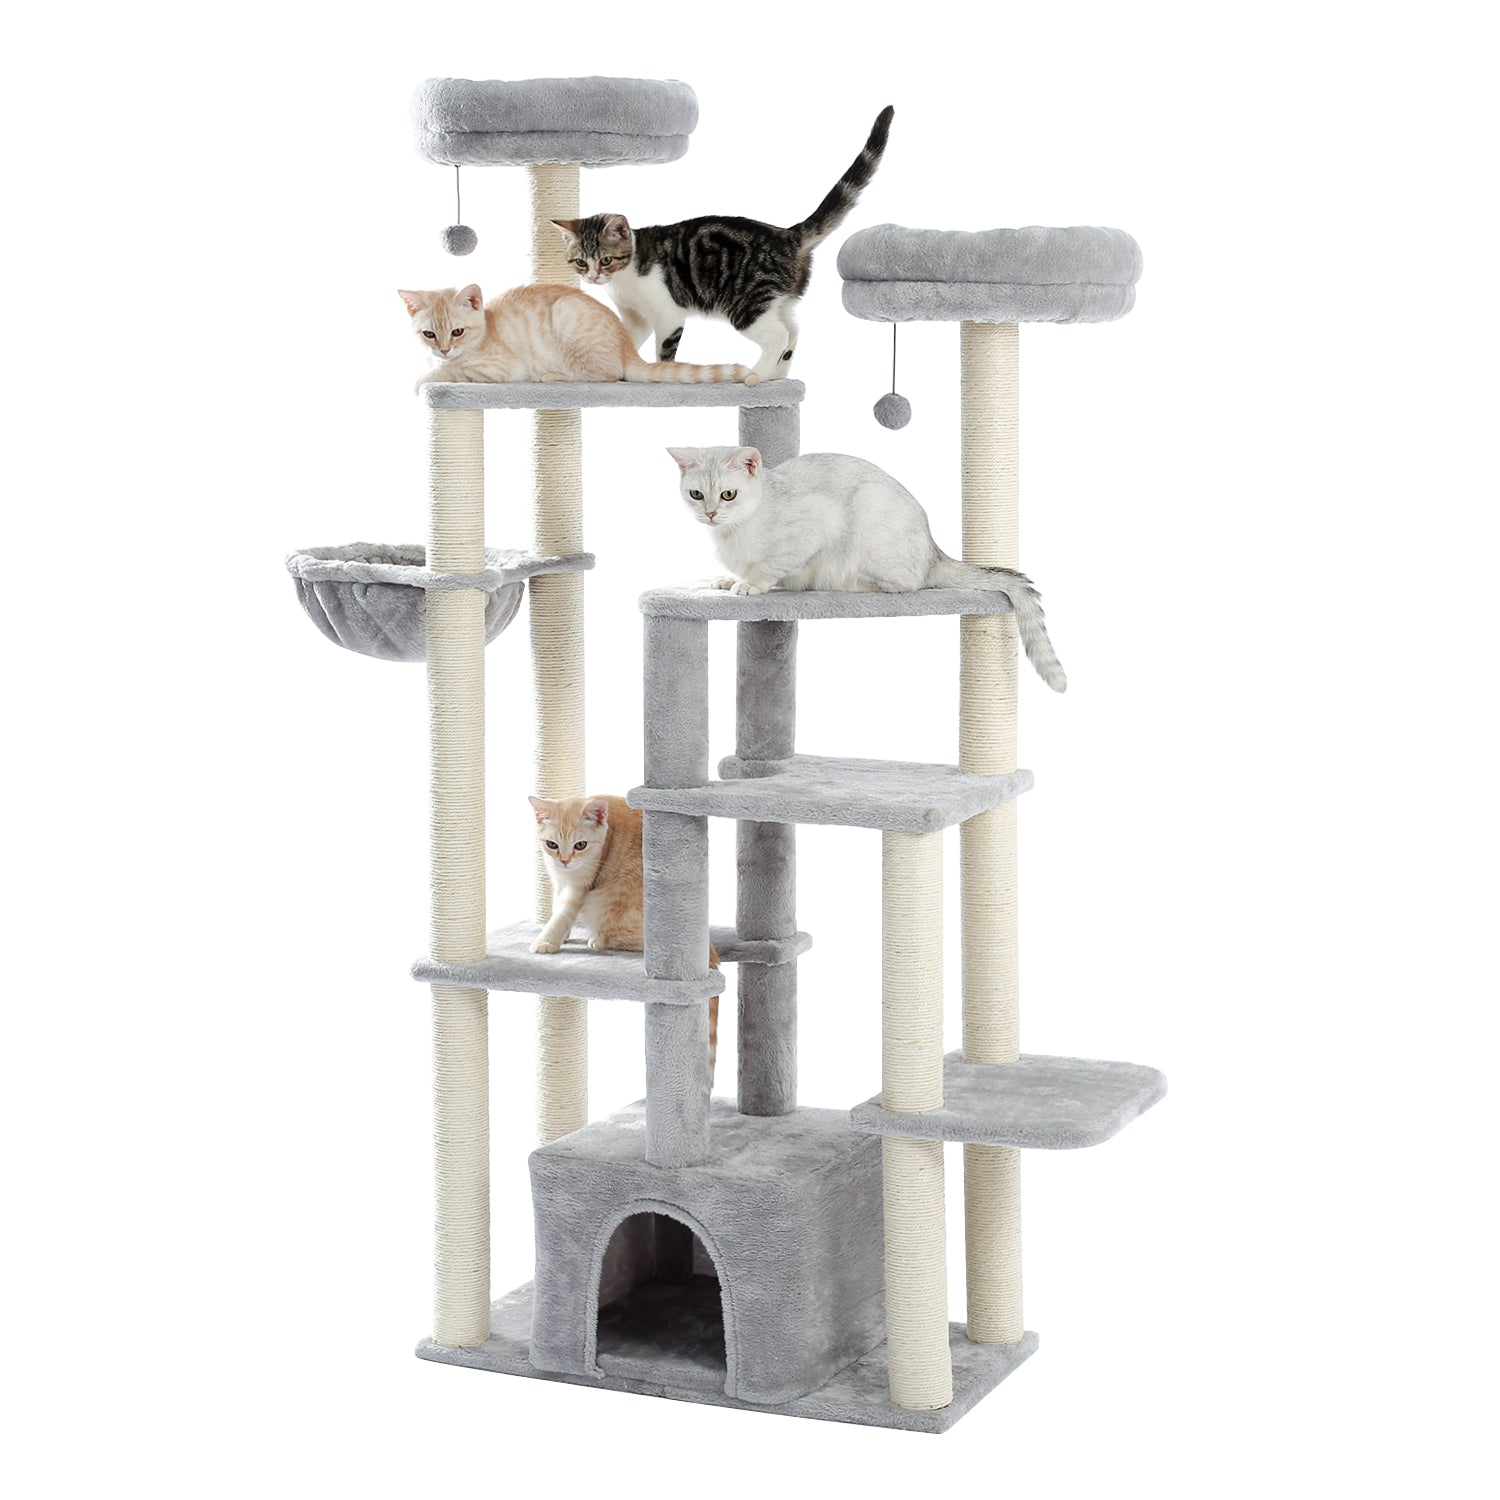 Multi-Platform 65.3’’ Cat Tree with Sisal Scratching Posts, Deluxe Condo, 2 Top Perches and Hammock Bed for Large Cats, Grey